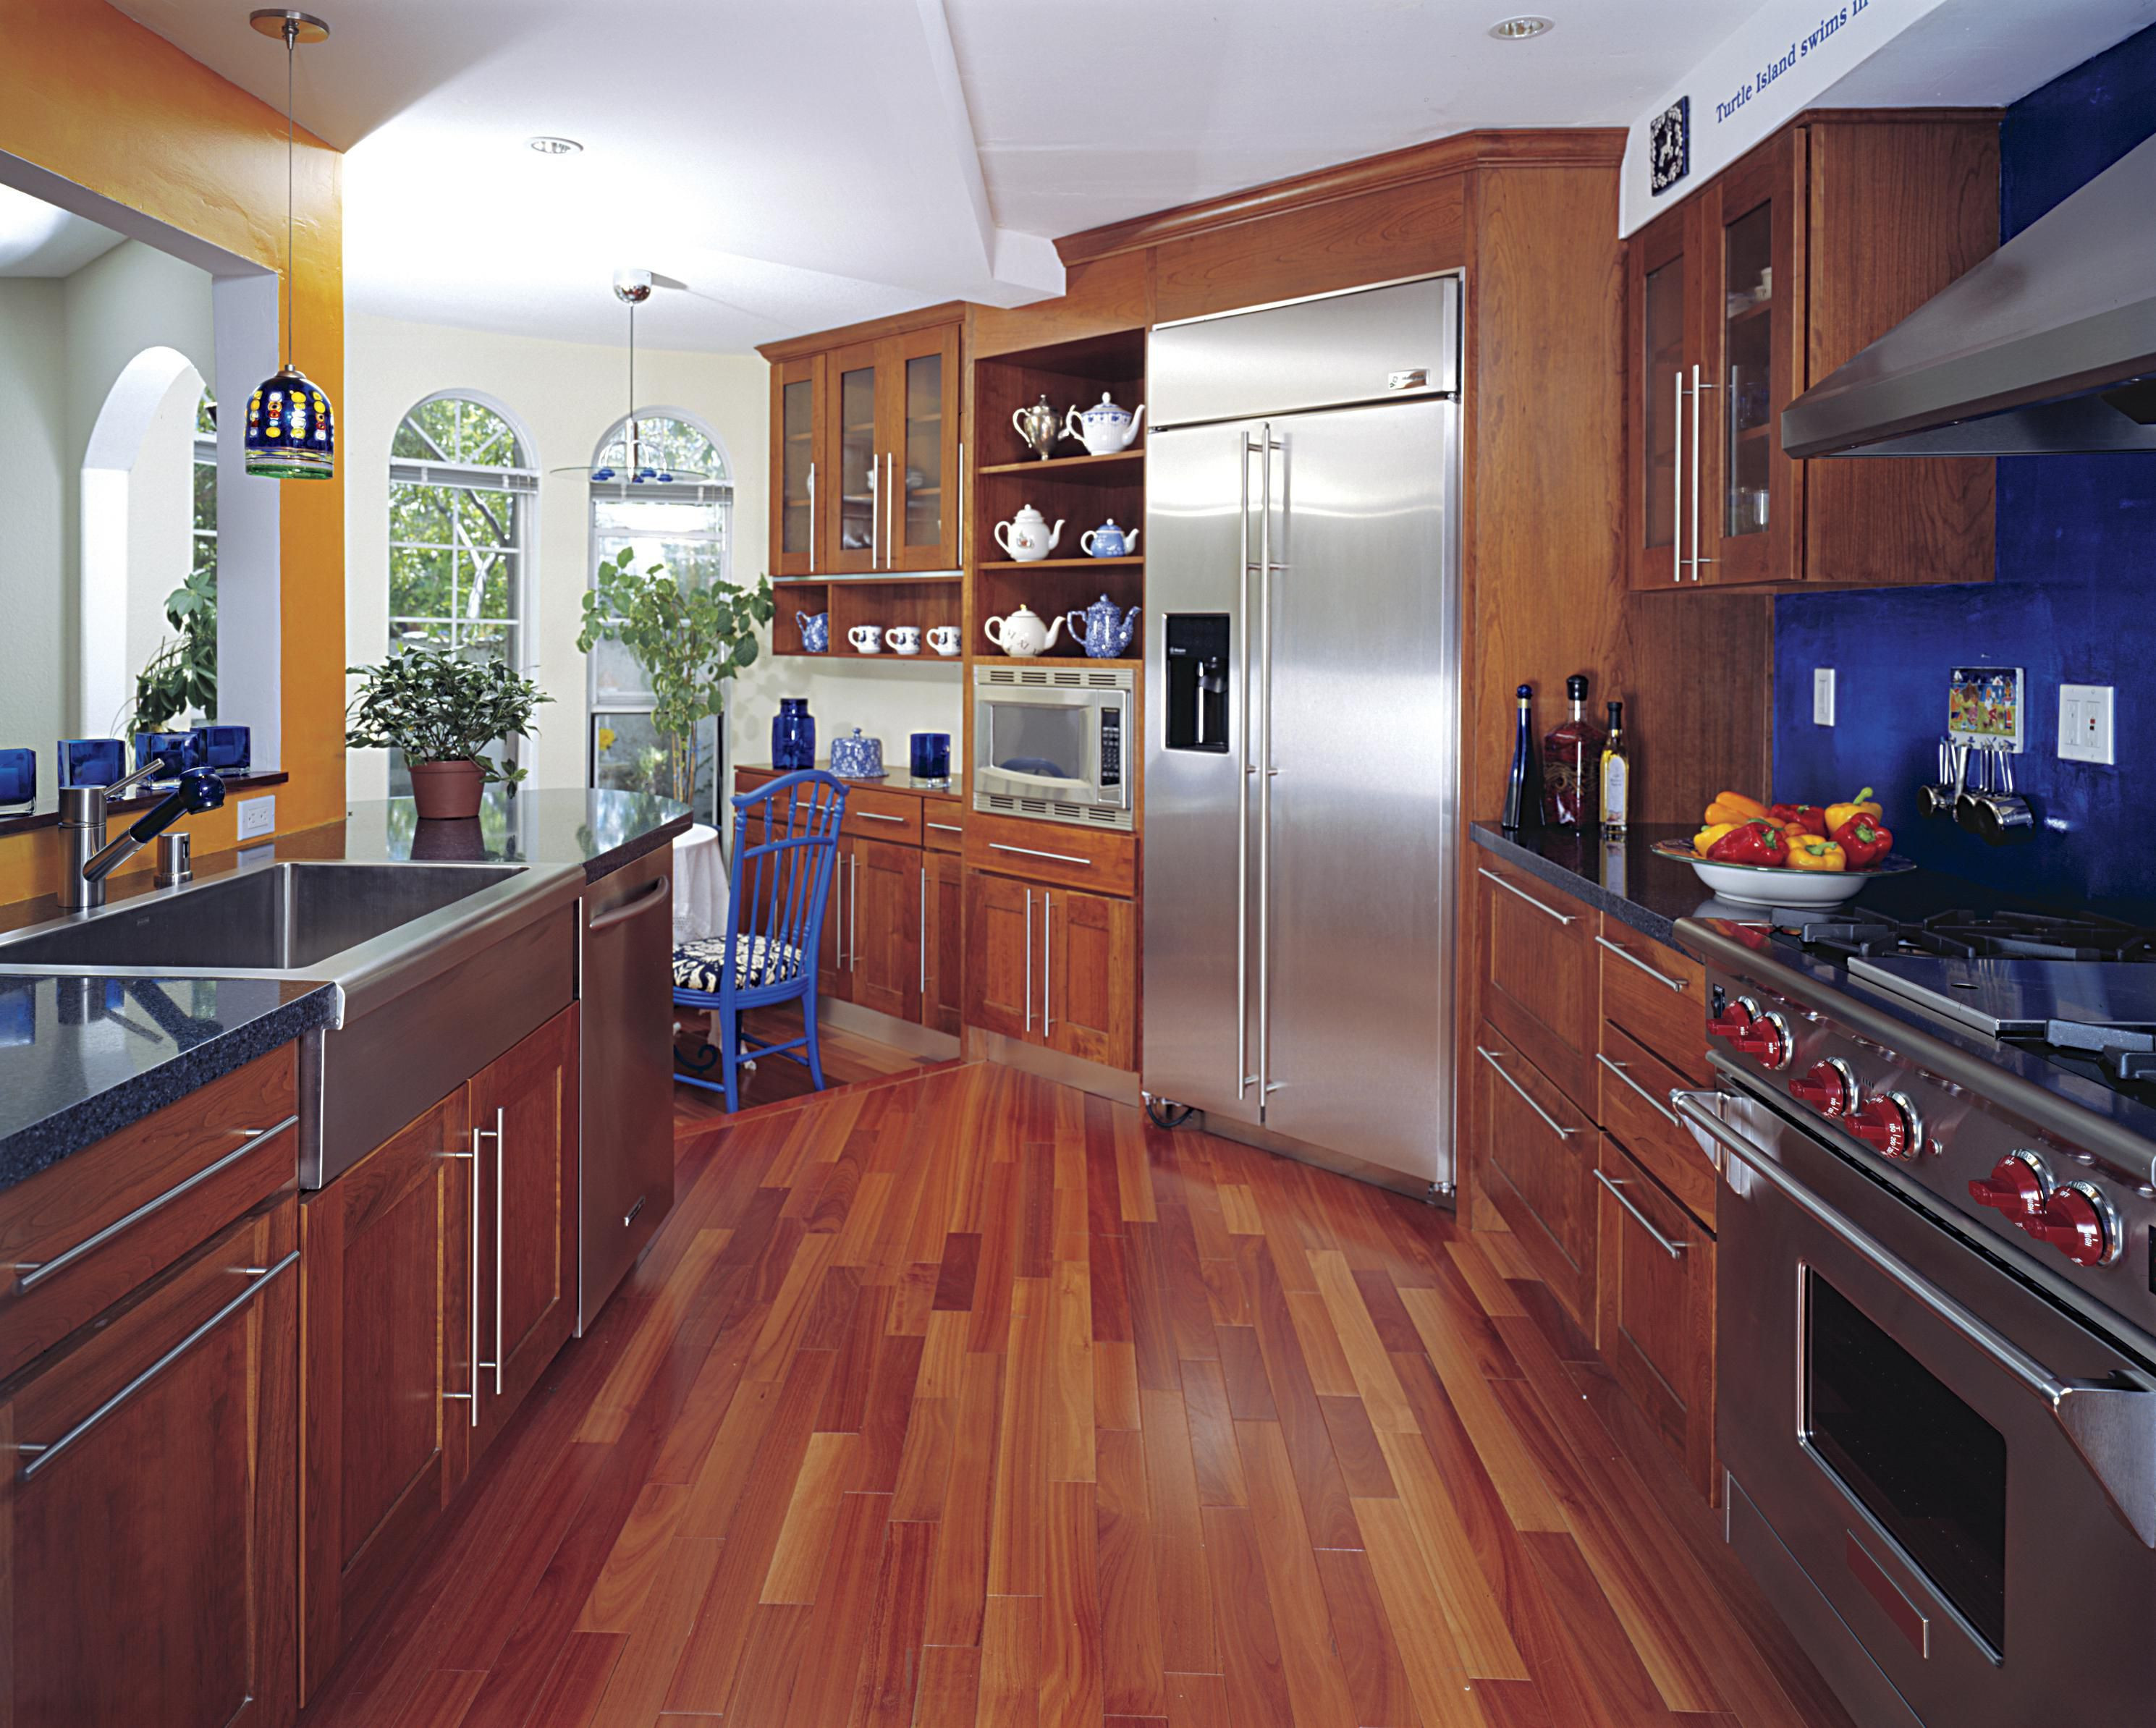 dark hardwood floors with light cabinets of hardwood floor in a kitchen is this allowed within 186828472 56a49f3a5f9b58b7d0d7e142